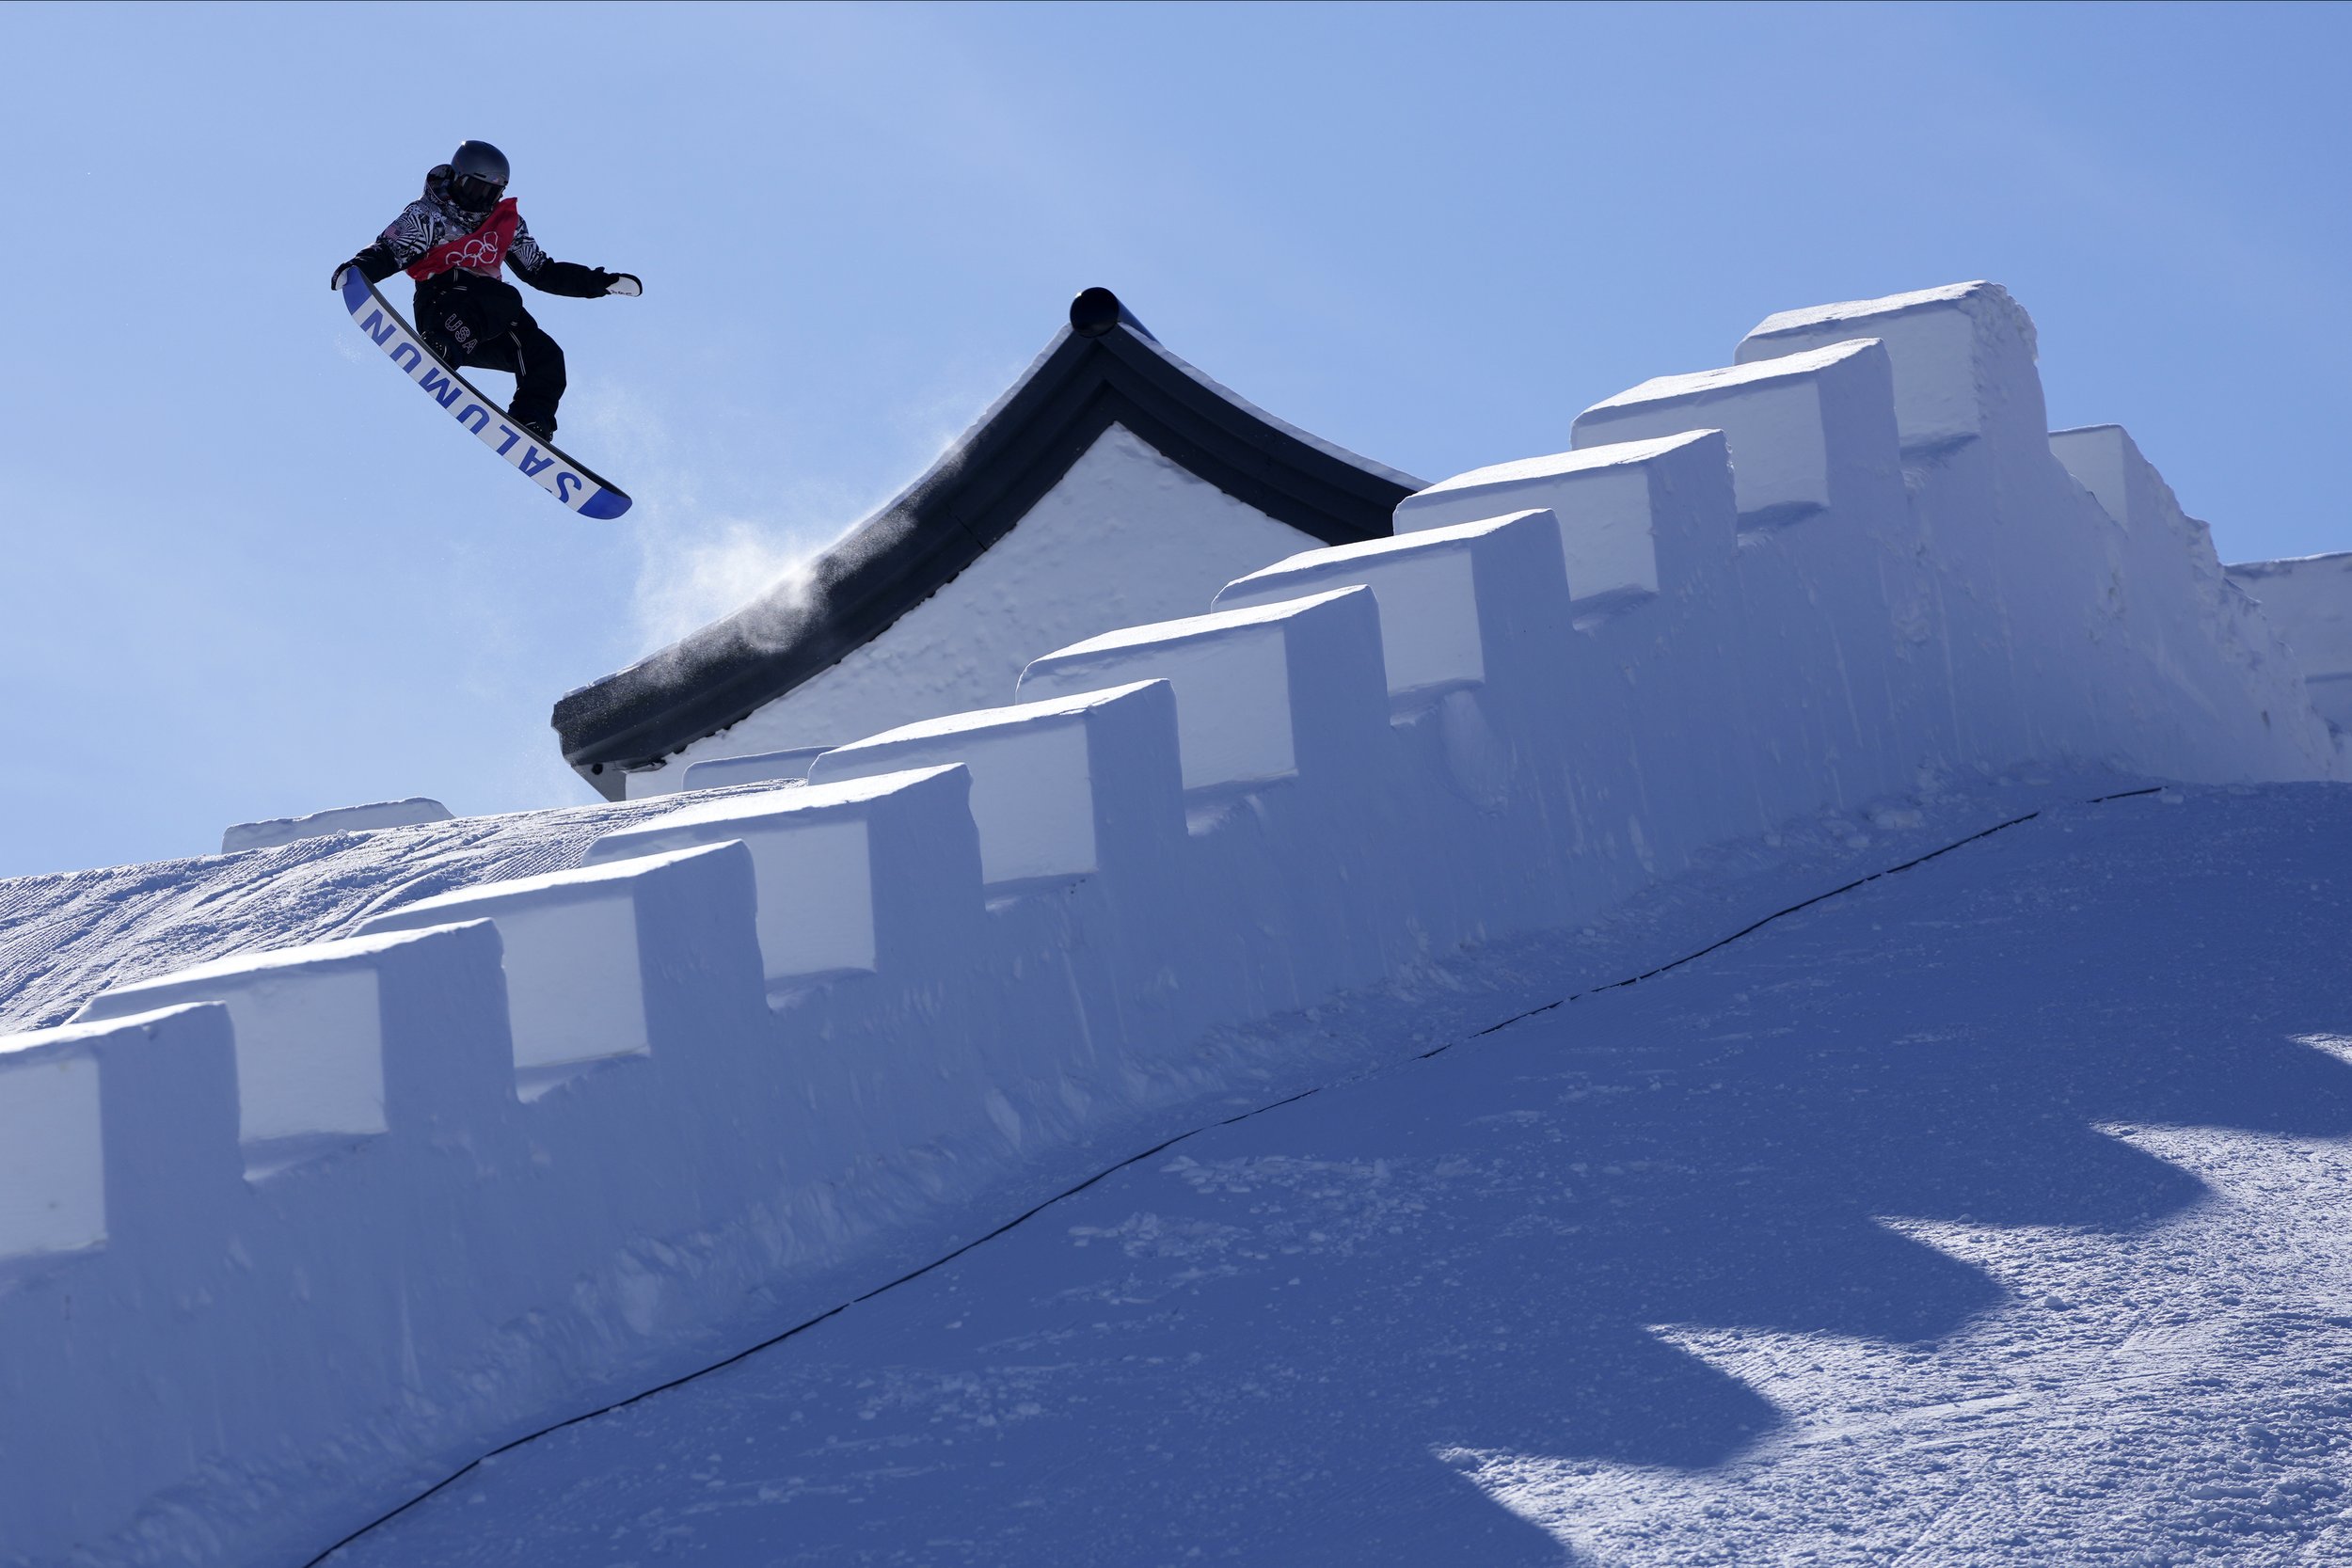  United States' Sean Fitzsimons competes during the men's slopestyle qualifying at the 2022 Winter Olympics, Sunday, Feb. 6, 2022, in Zhangjiakou, China. (AP Photo/Lee Jin-man) 